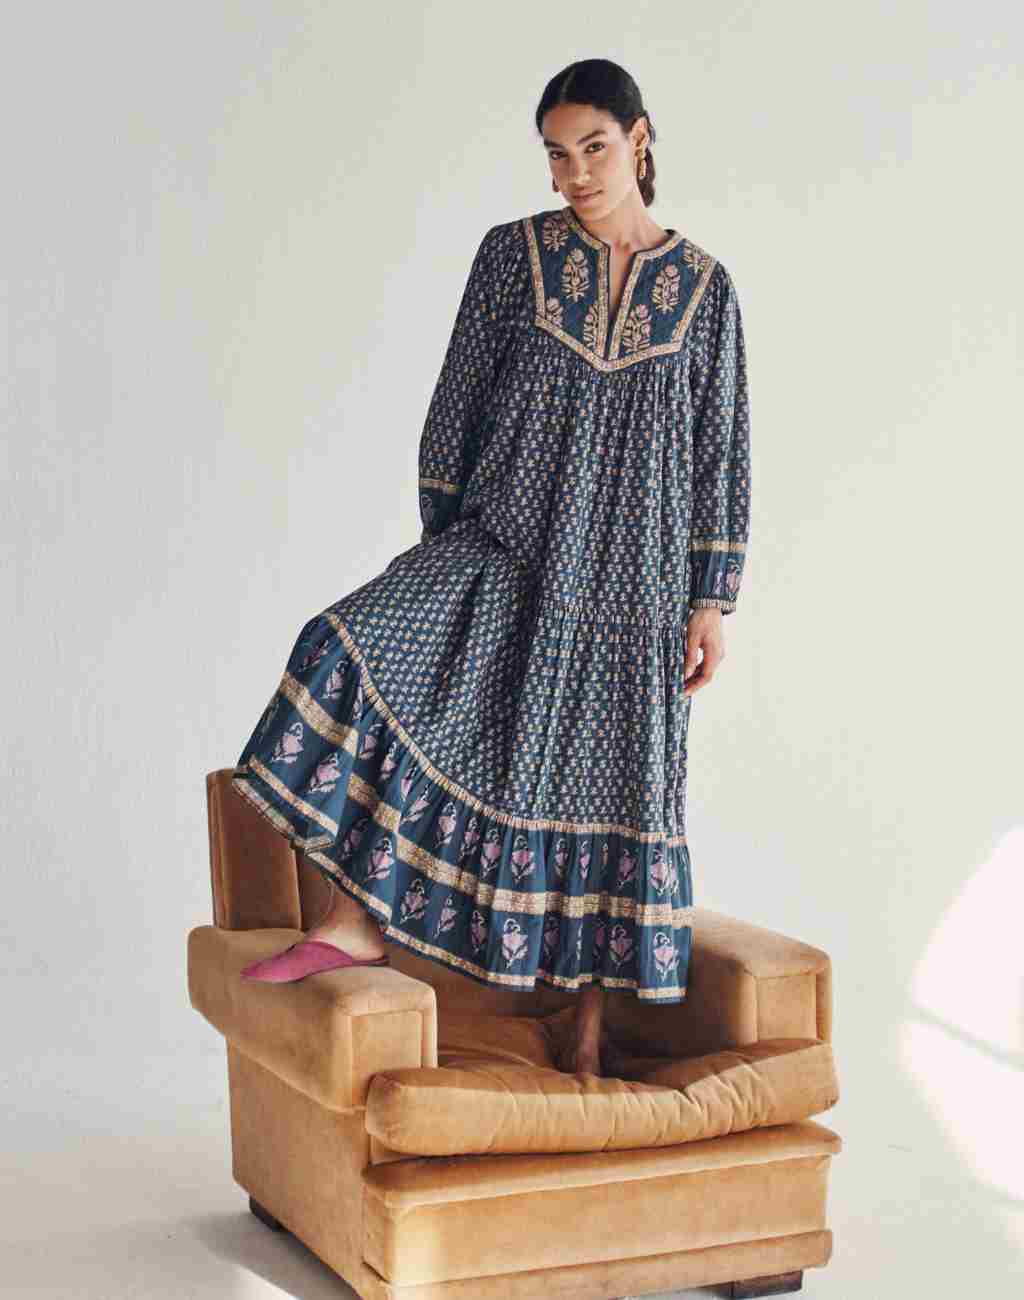 Gypsy Block Print Maxi Dress with Quilted Yoke and Balloon Sleeves - Visit Nifty Louise Misha 